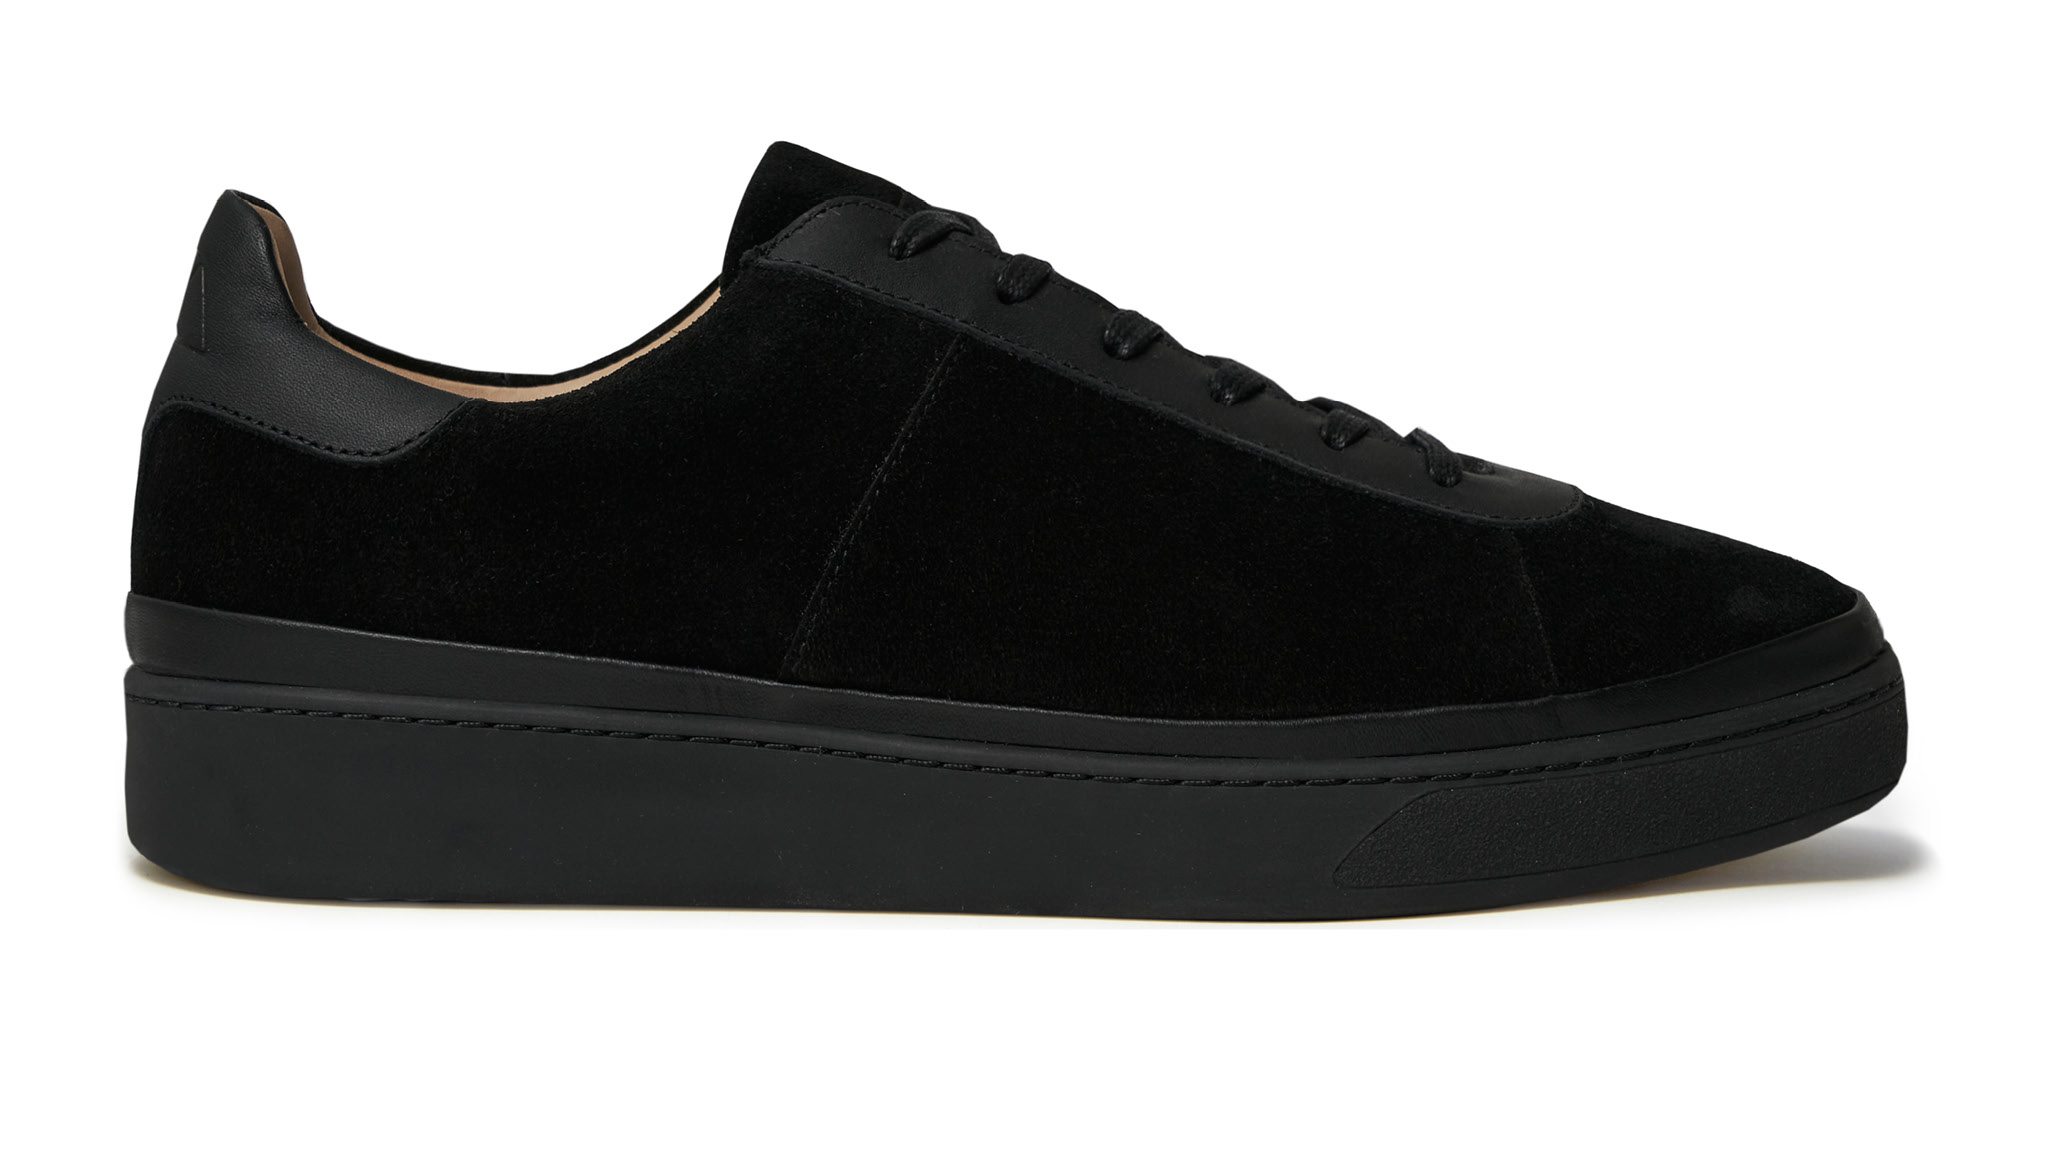 Black Sneakers for Men, MULO Shoes